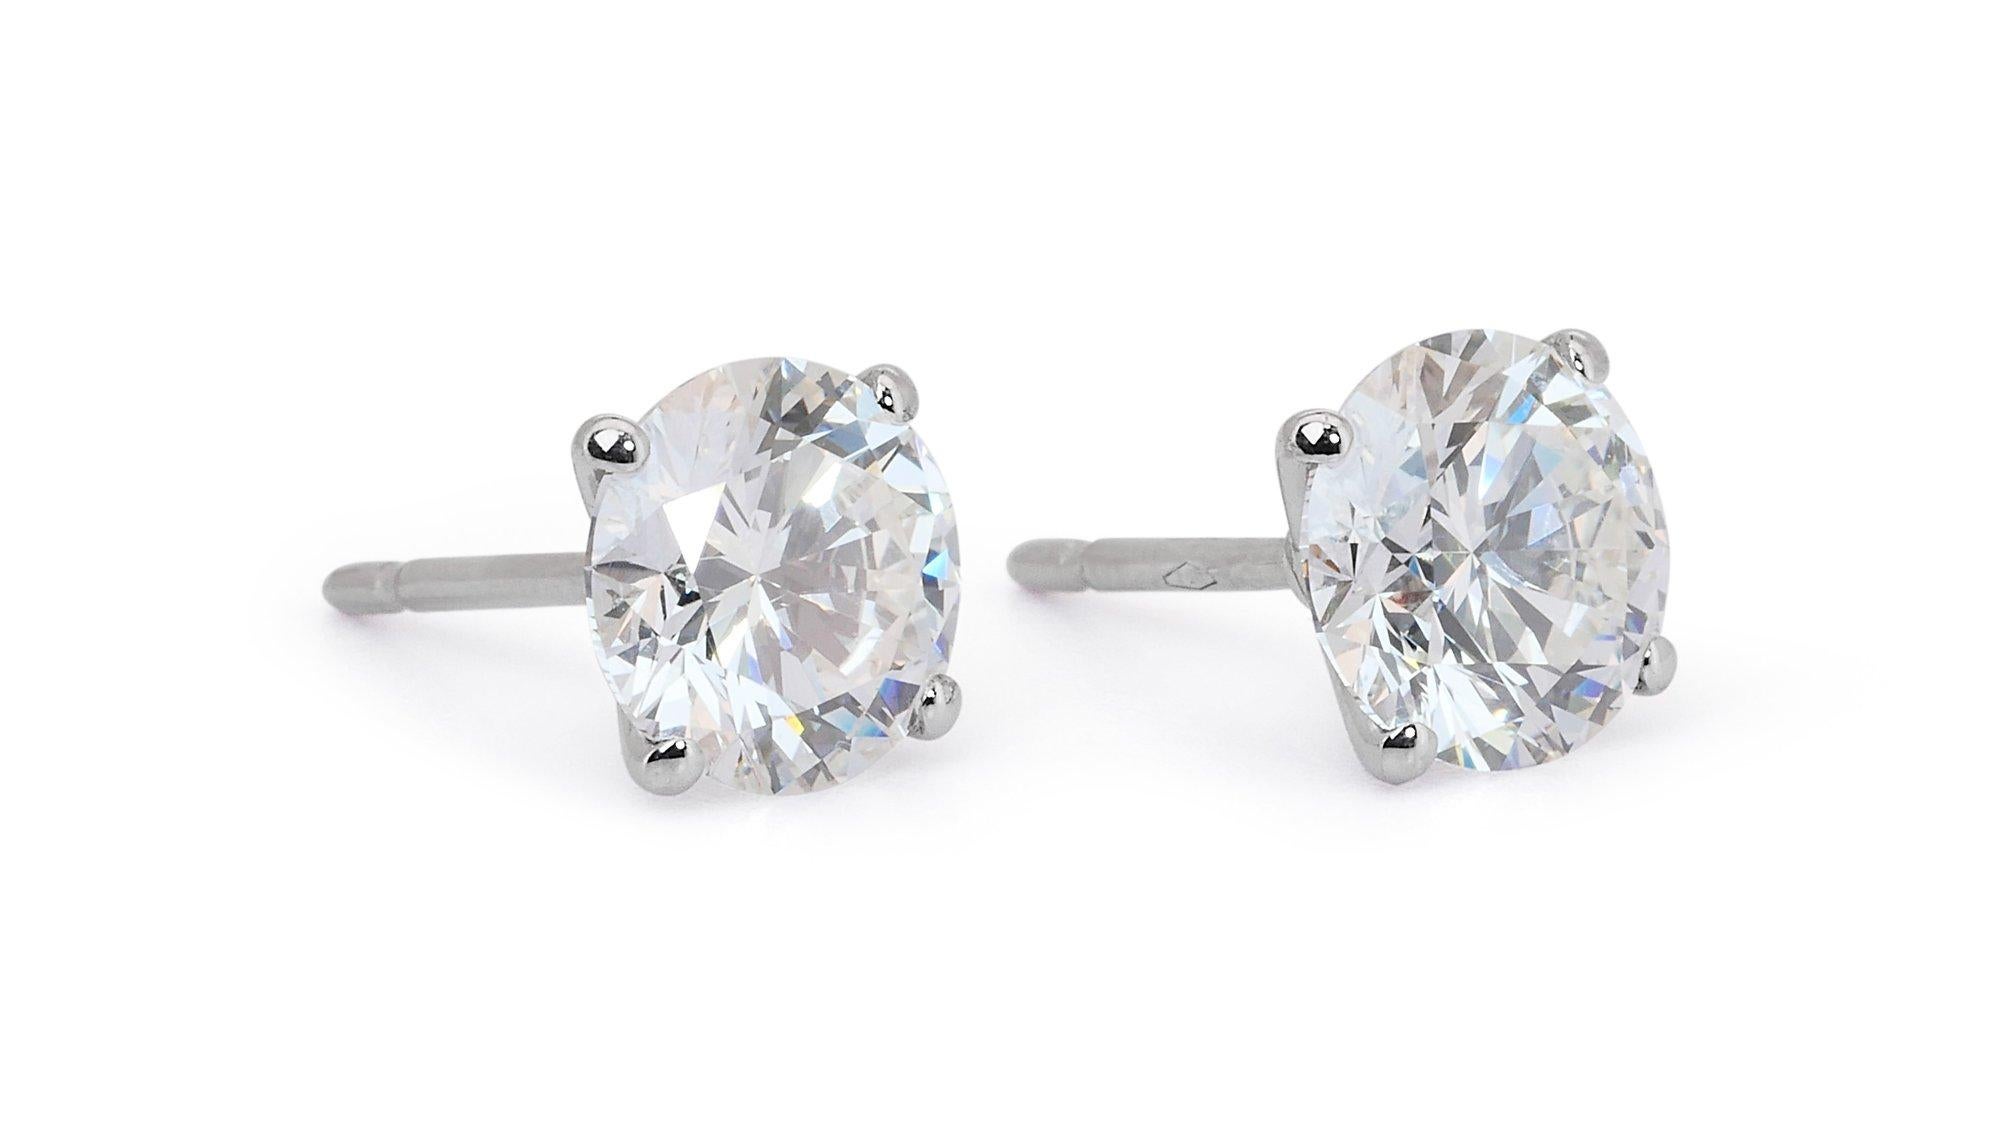 Sparkling 18k White Gold Stud Earrings with 3.13ct Natural Diamonds GIA Cert For Sale 1